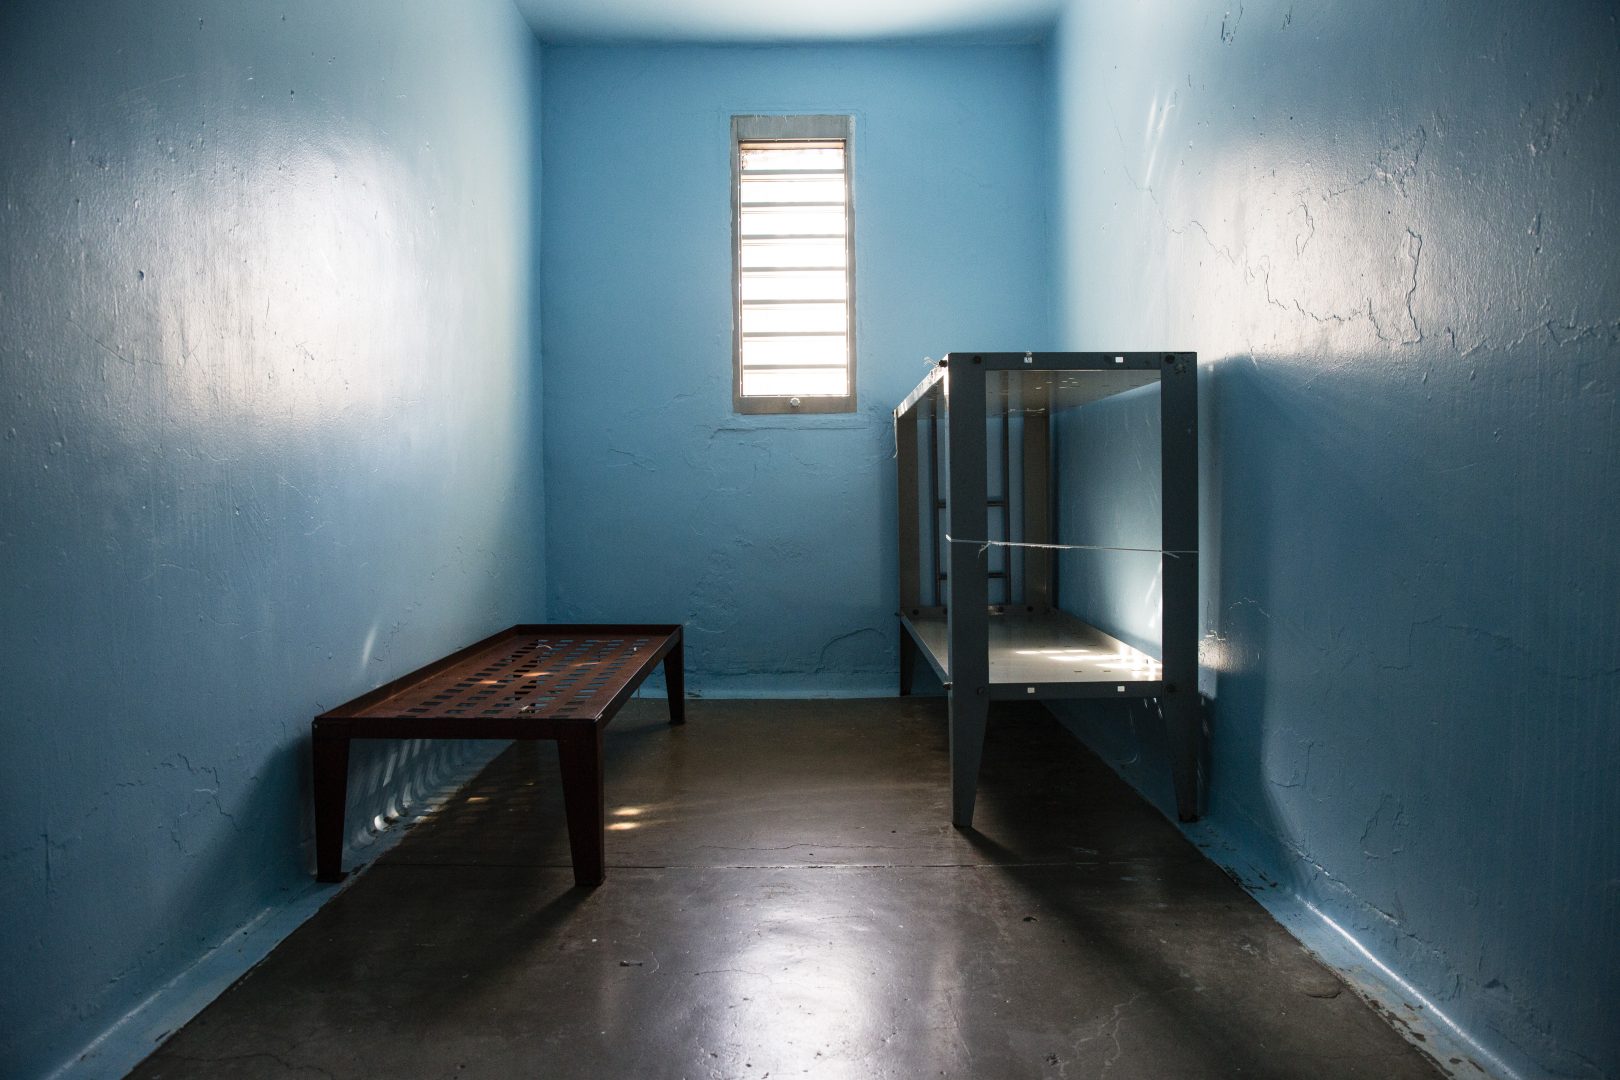 Empty beds in a jail cell.